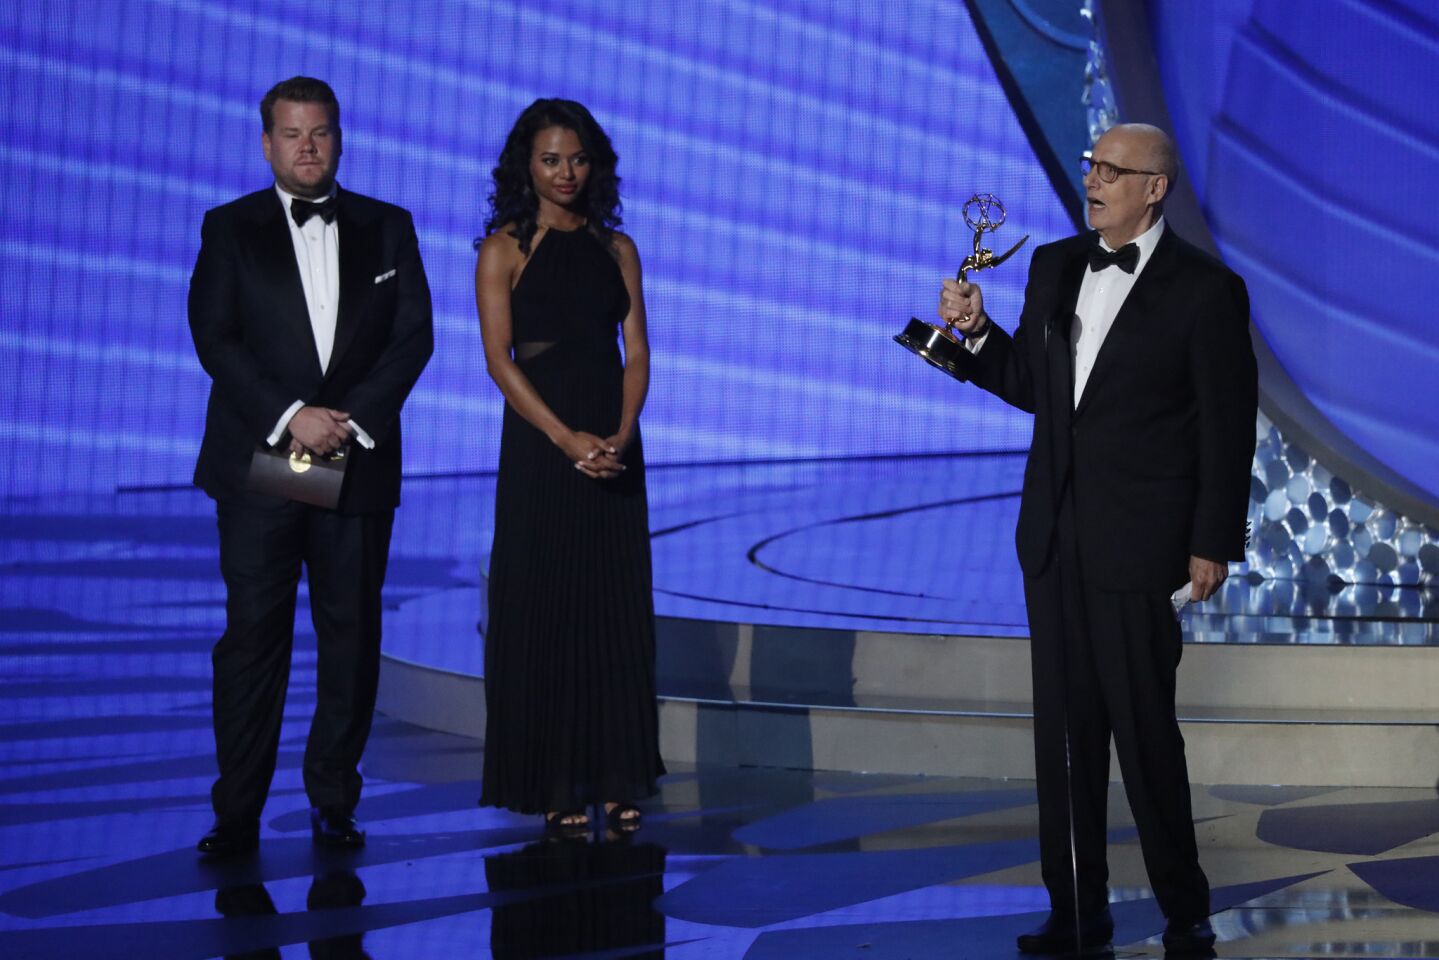 Jeffrey Tambor accepts the Emmy for Lead Actor in a Comedy Series for his role in "Transparent."